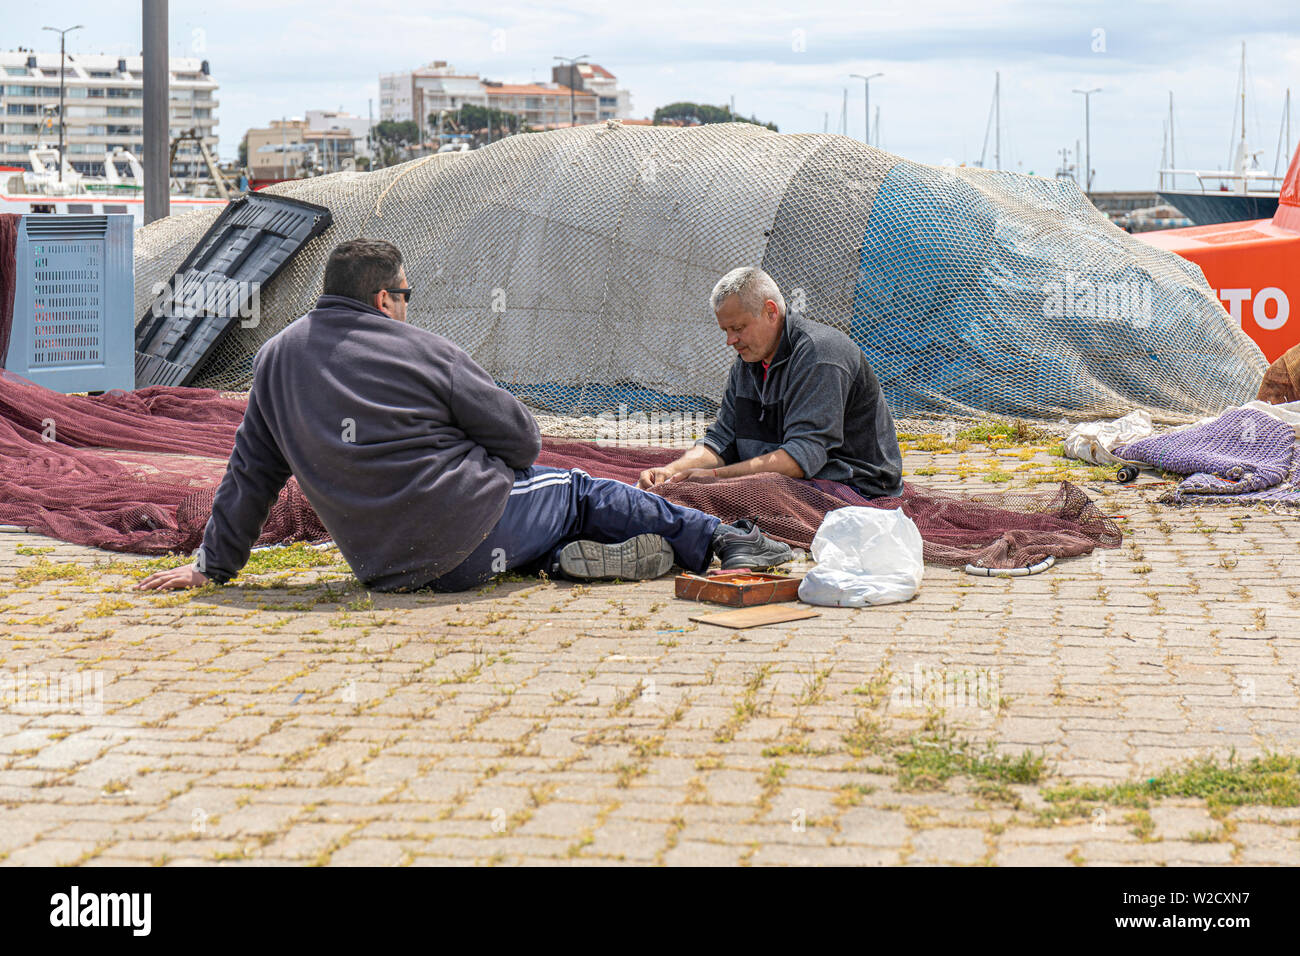 Fisherman Repairing fishing nets on the quayside at Palamos with interested onlooker Stock Photo